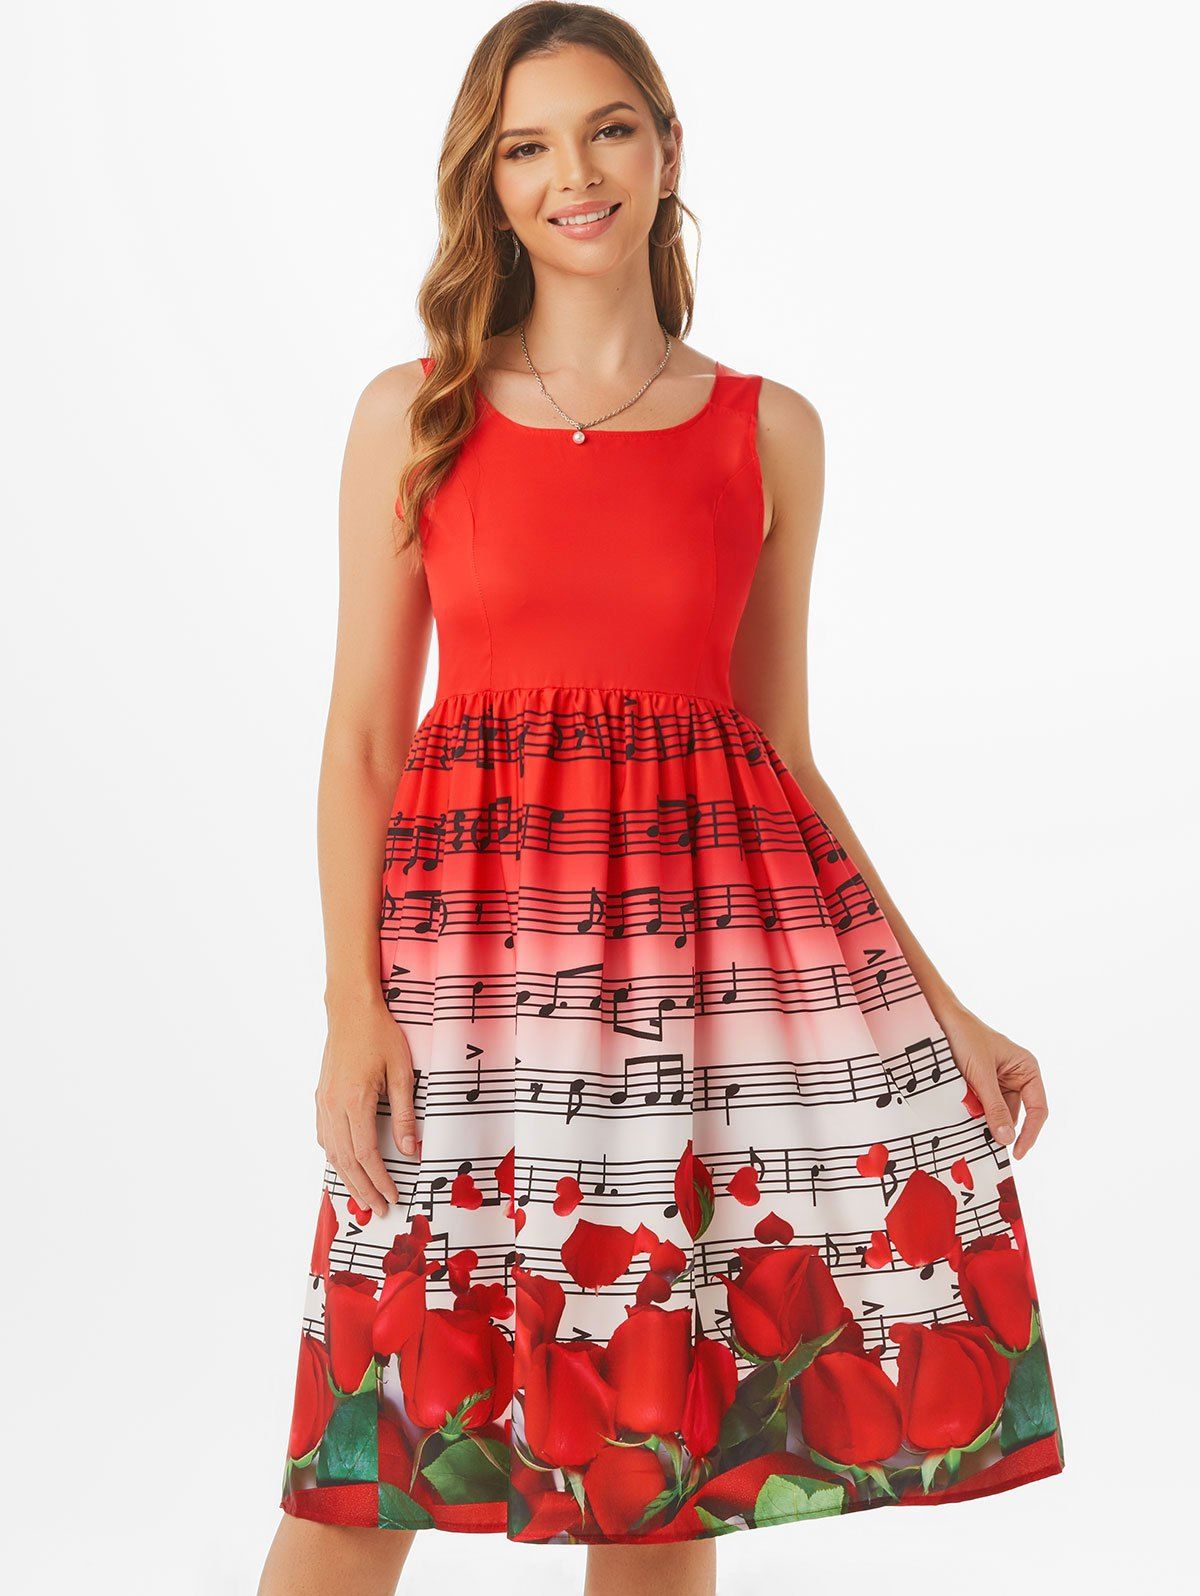 Musical Note Floral Heart Print Sleeveless Dress - multicolor M